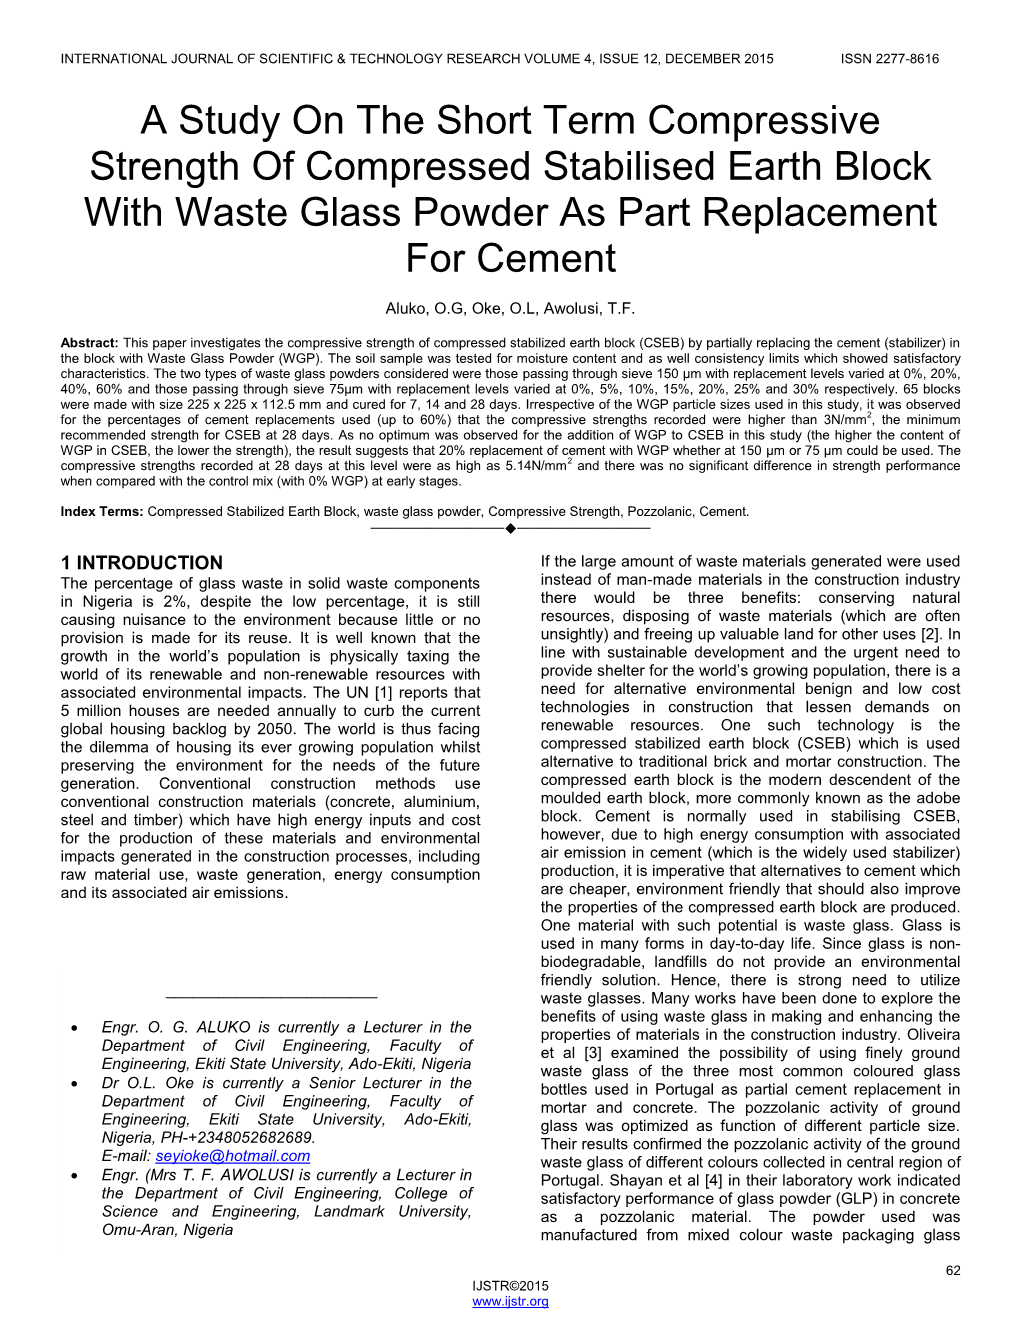 A Study on the Short Term Compressive Strength of Compressed Stabilised Earth Block with Waste Glass Powder As Part Replacement for Cement